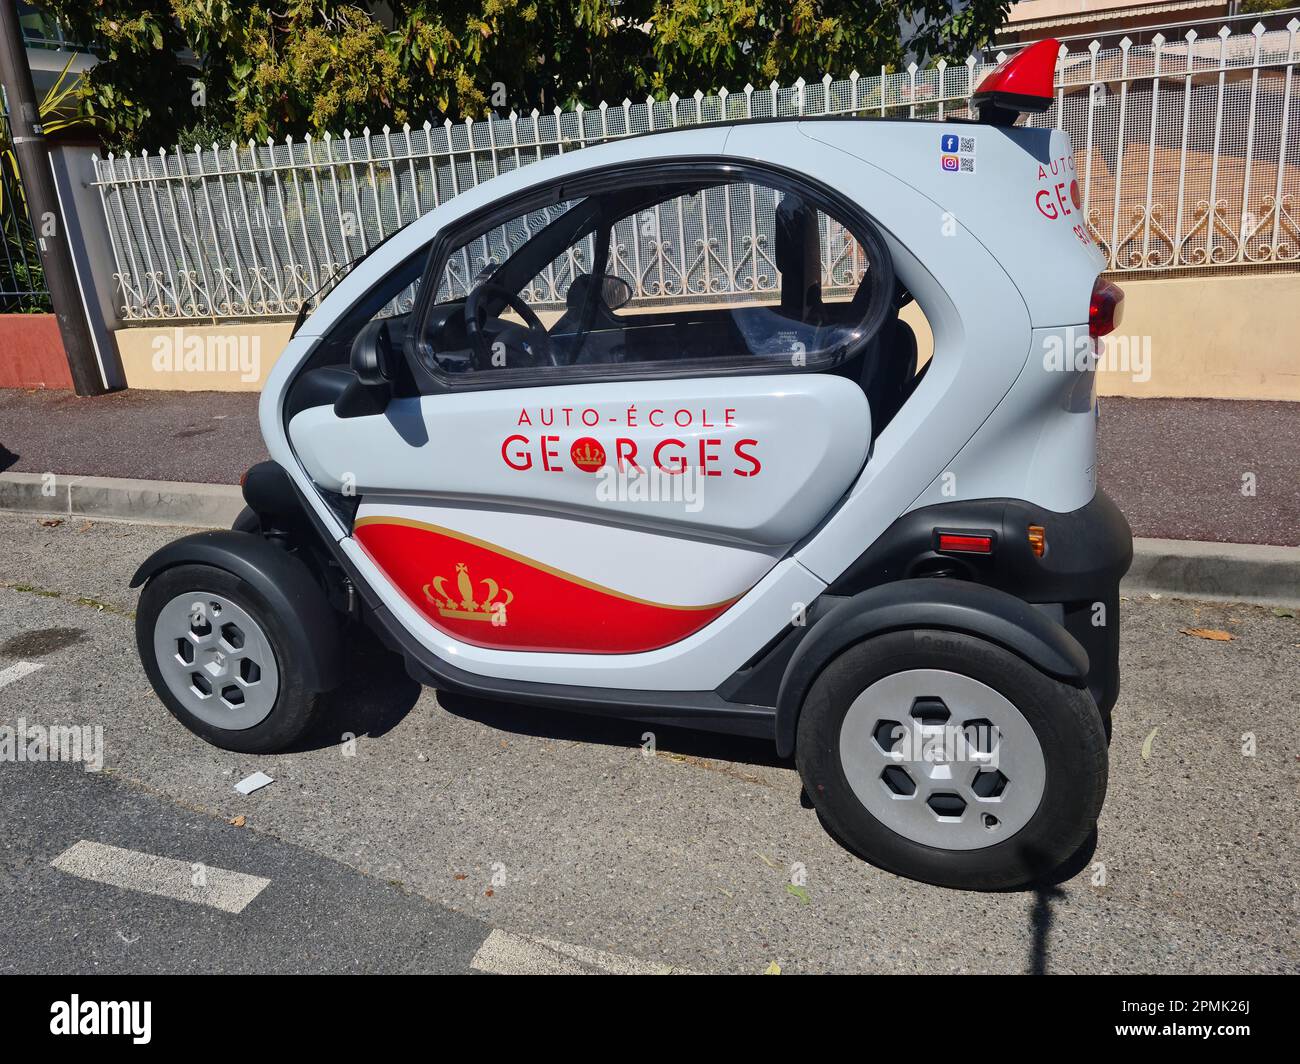 Roquebrune-Cap-Martin, France, 15 Aprilr 2022: Georges Driving School's Renault Twizy 45, an electric and compact vehicle for learner drivers, seen in Stock Photo